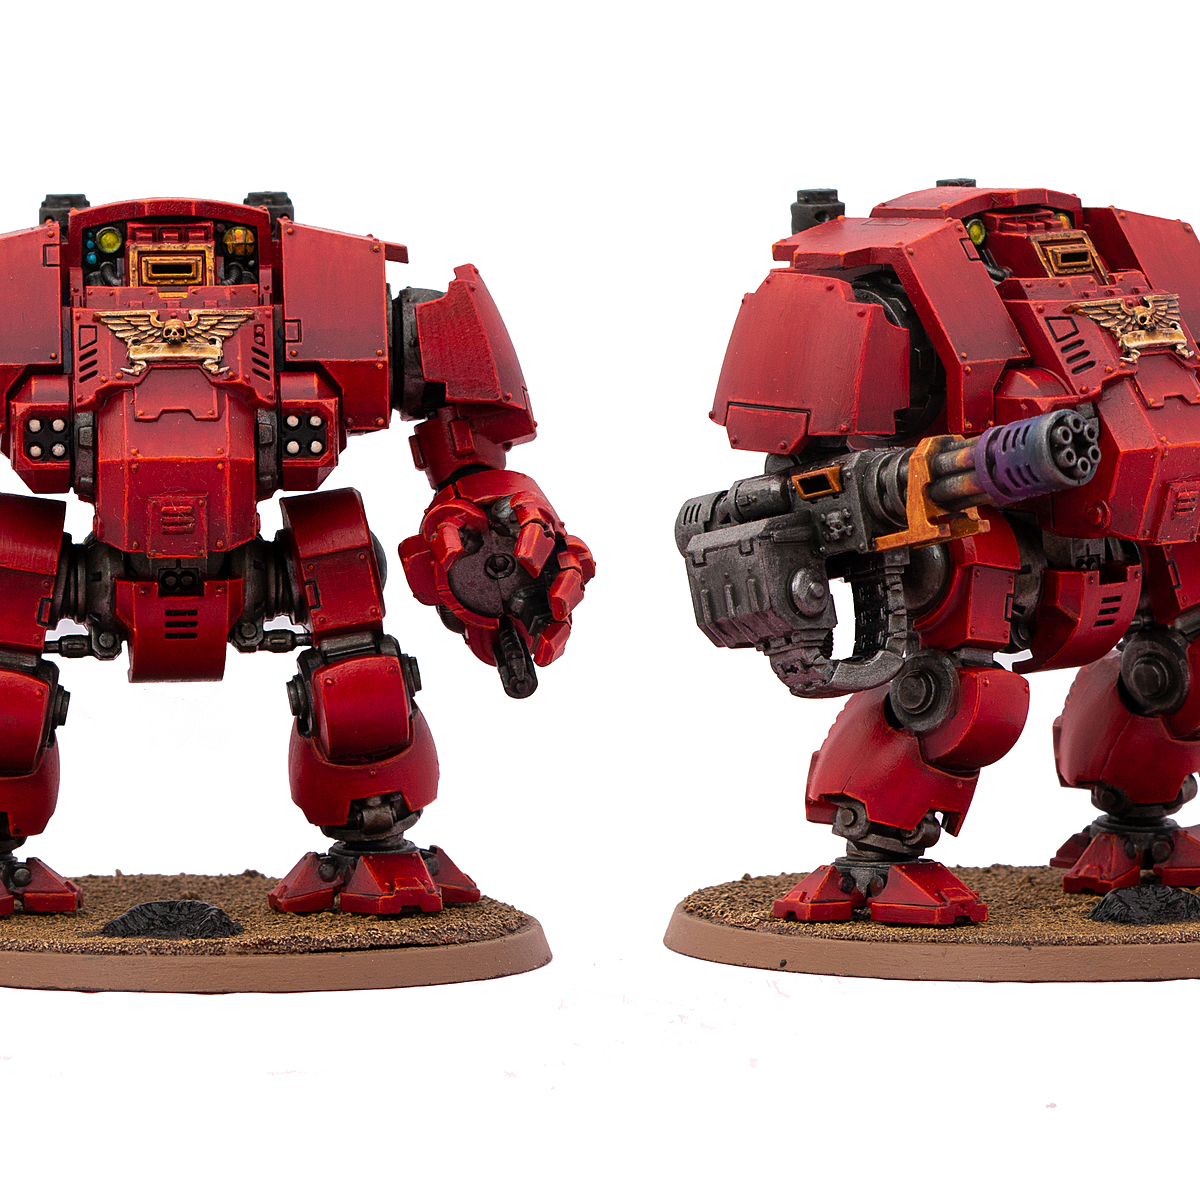 Blood Angels armour